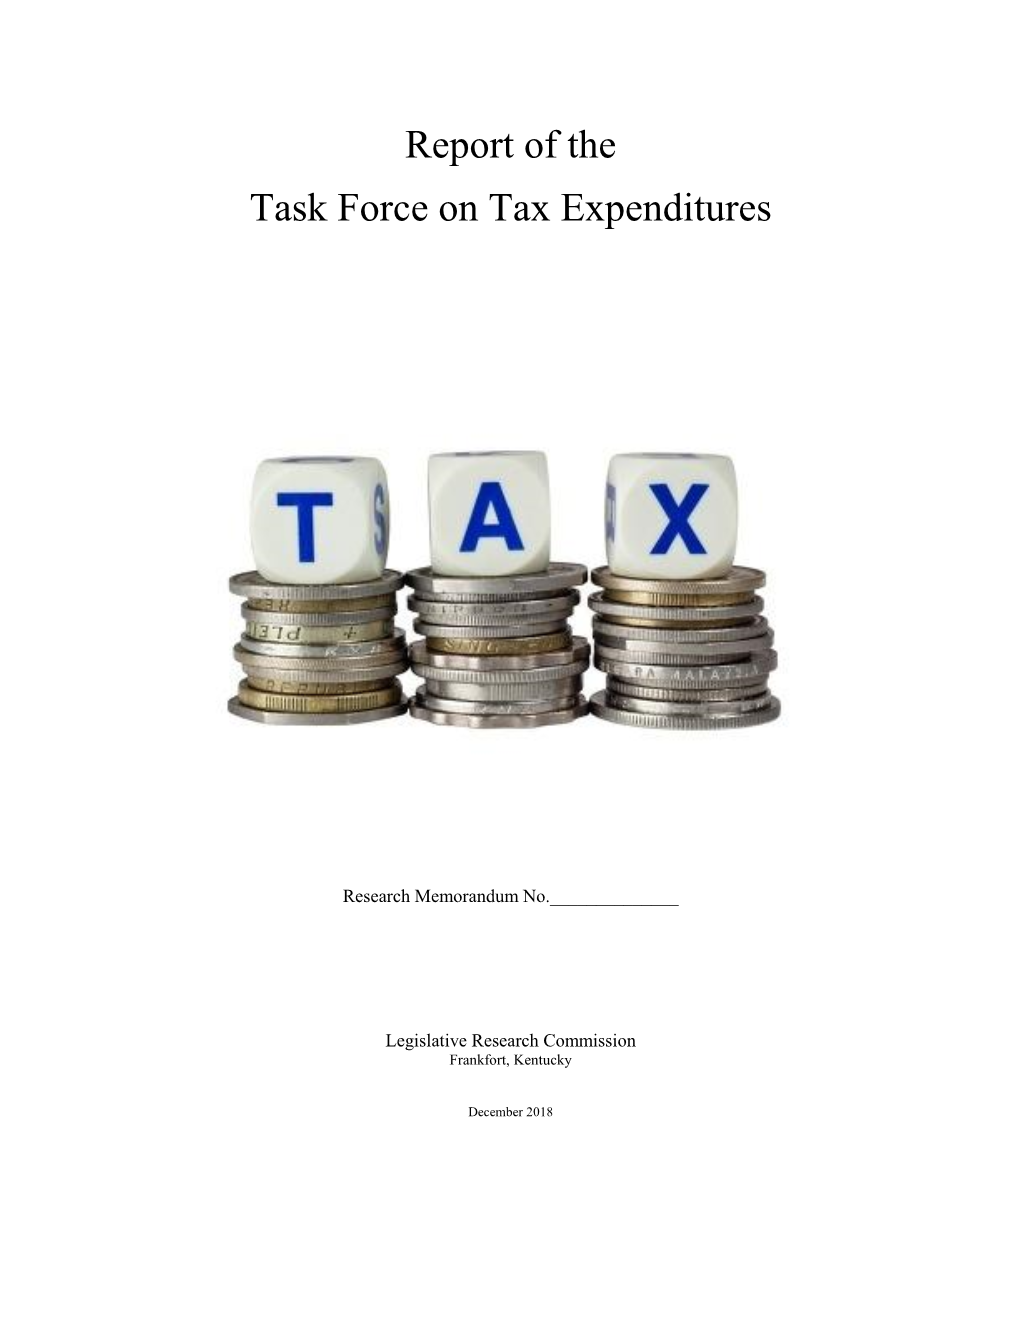 Report of the Task Force on Tax Expenditures